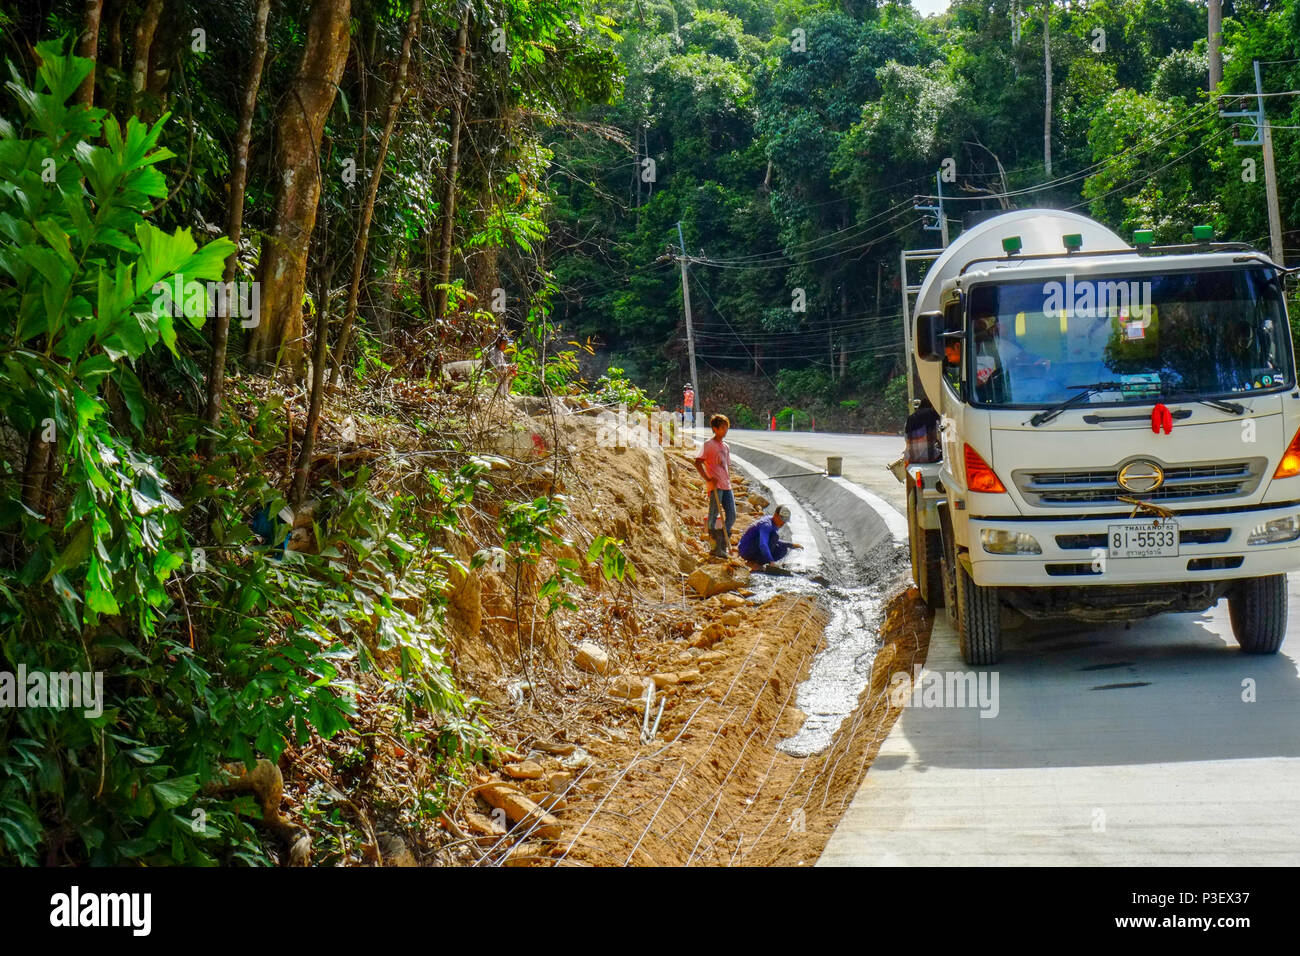 Construction Workers from Myanmar are building new roads through the jungles covering the mountains of the Thai island Koh Phangan, Thailand Stock Photo